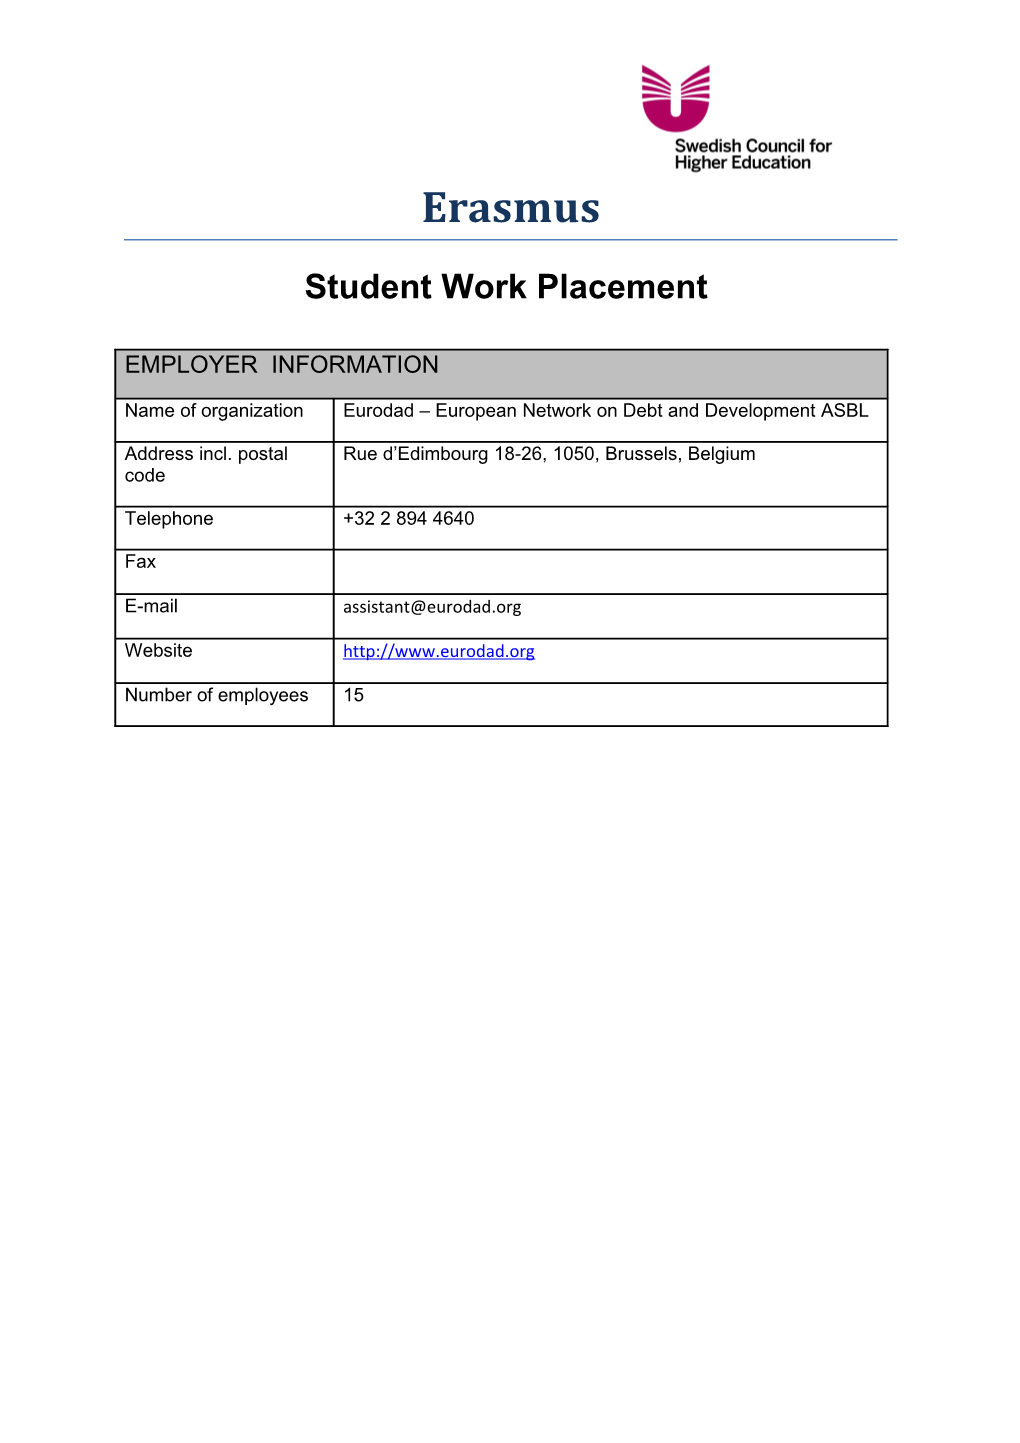 Student Work Placement